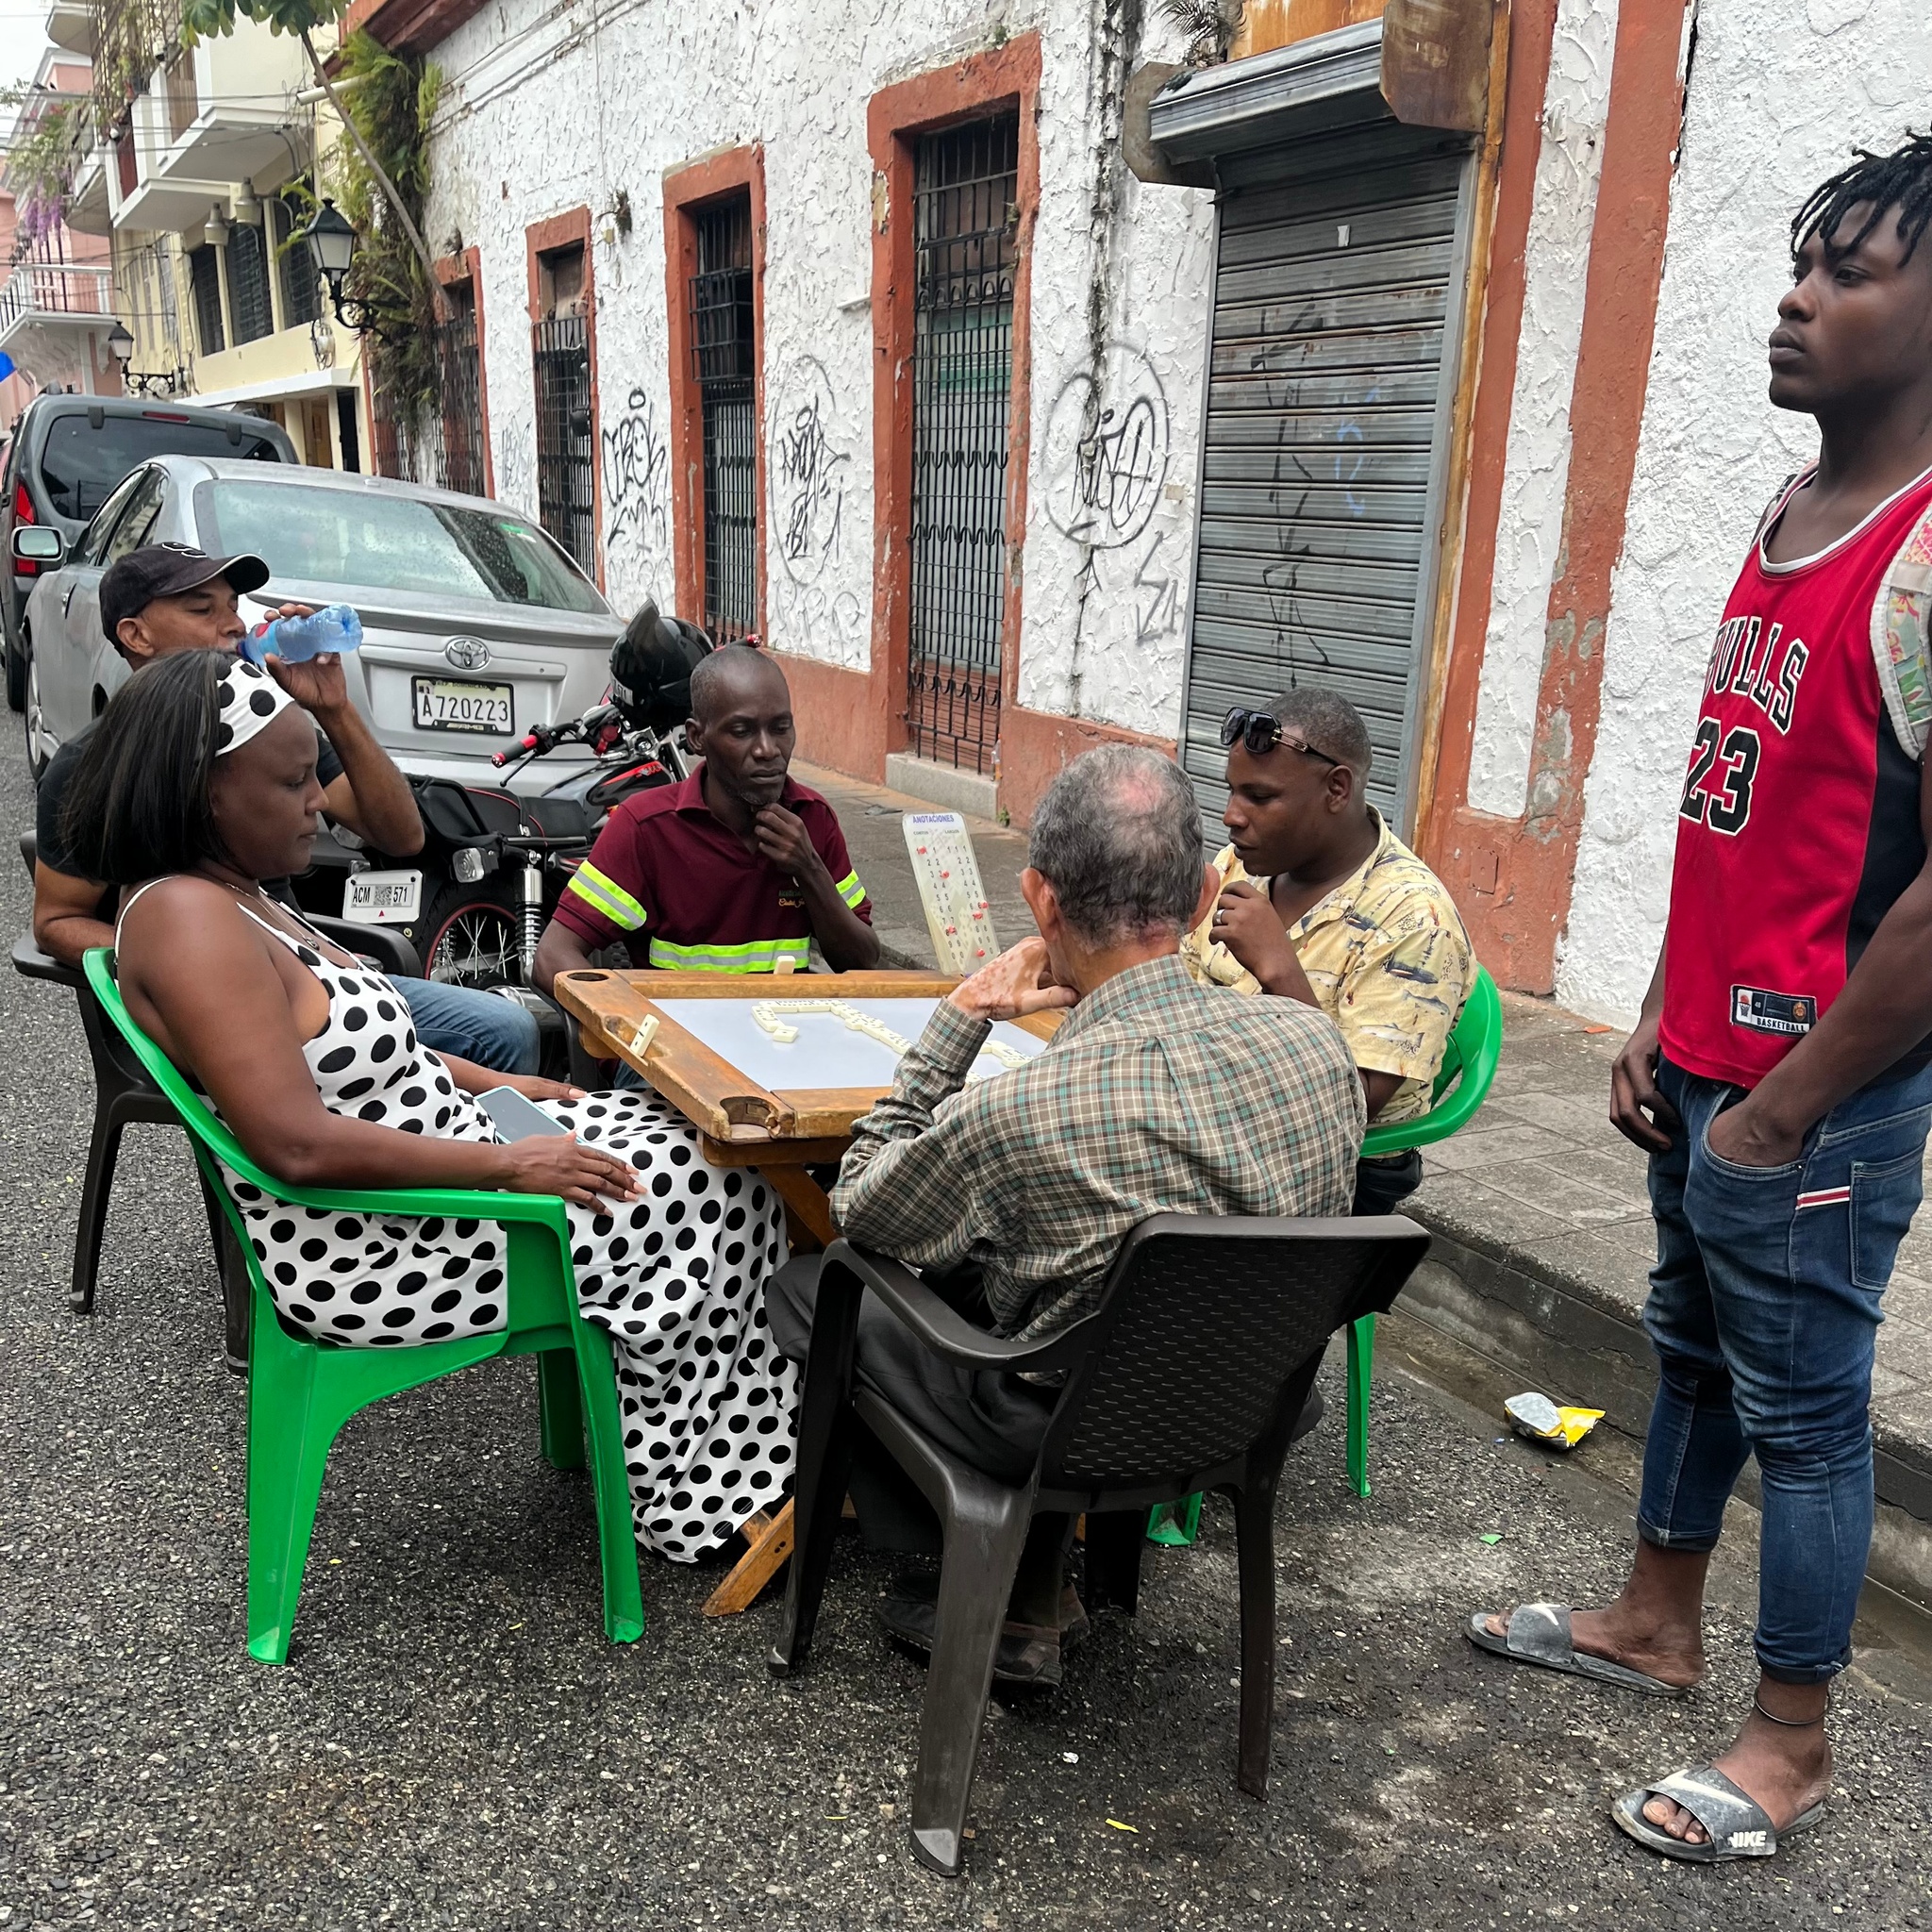 Six people gather around a board game that they are playing on a side street in a Dominican Republic neighborhood. Five of the players are seated around the table with their attention on the game. A sixth person stands to the side, looking over and away from the table. He wears a red Chicago Bulls jersey, blue pants, sandals, and has dark brown skin. 